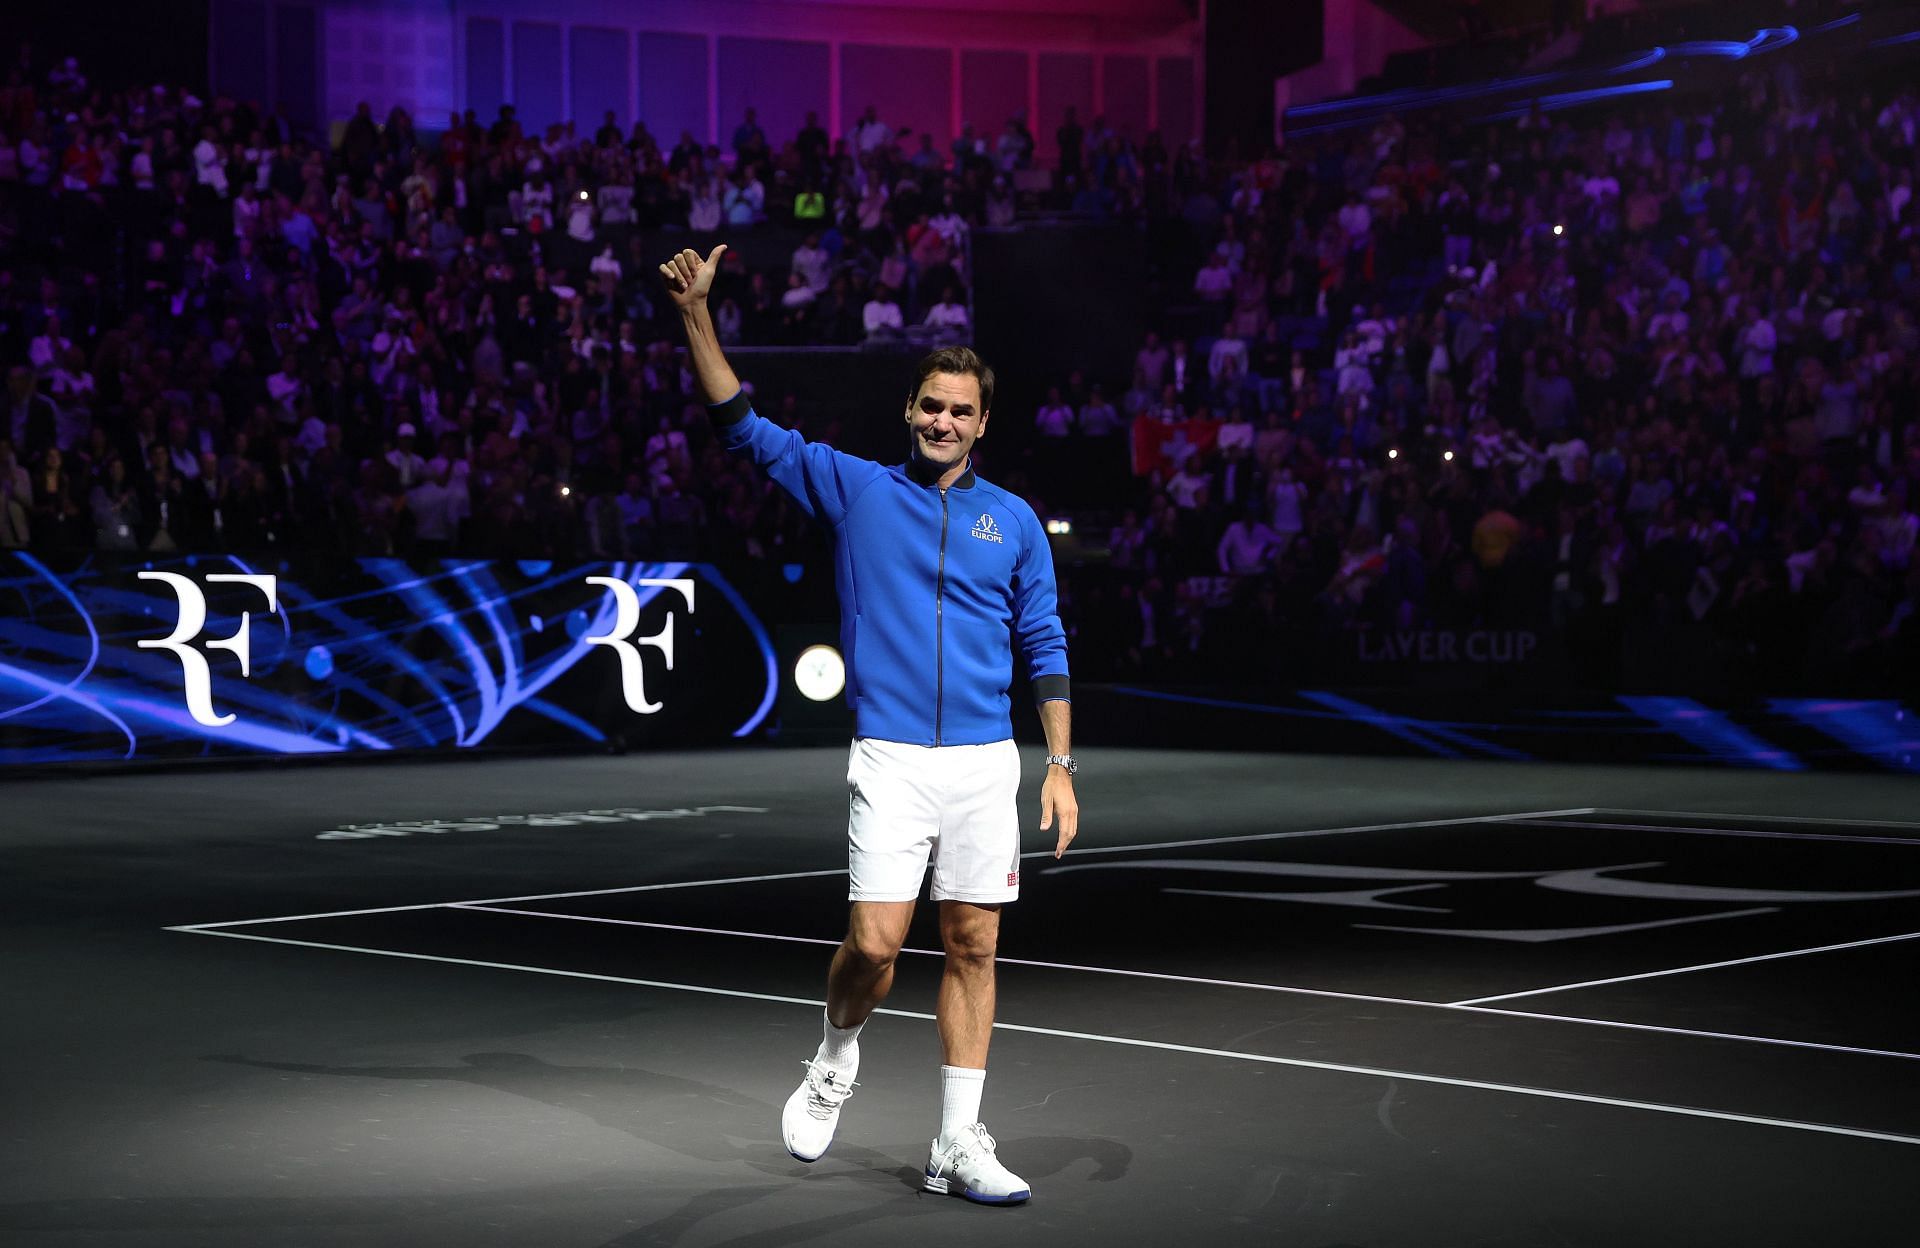 Roger Federer acknowledging the crowd at the Laver Cup